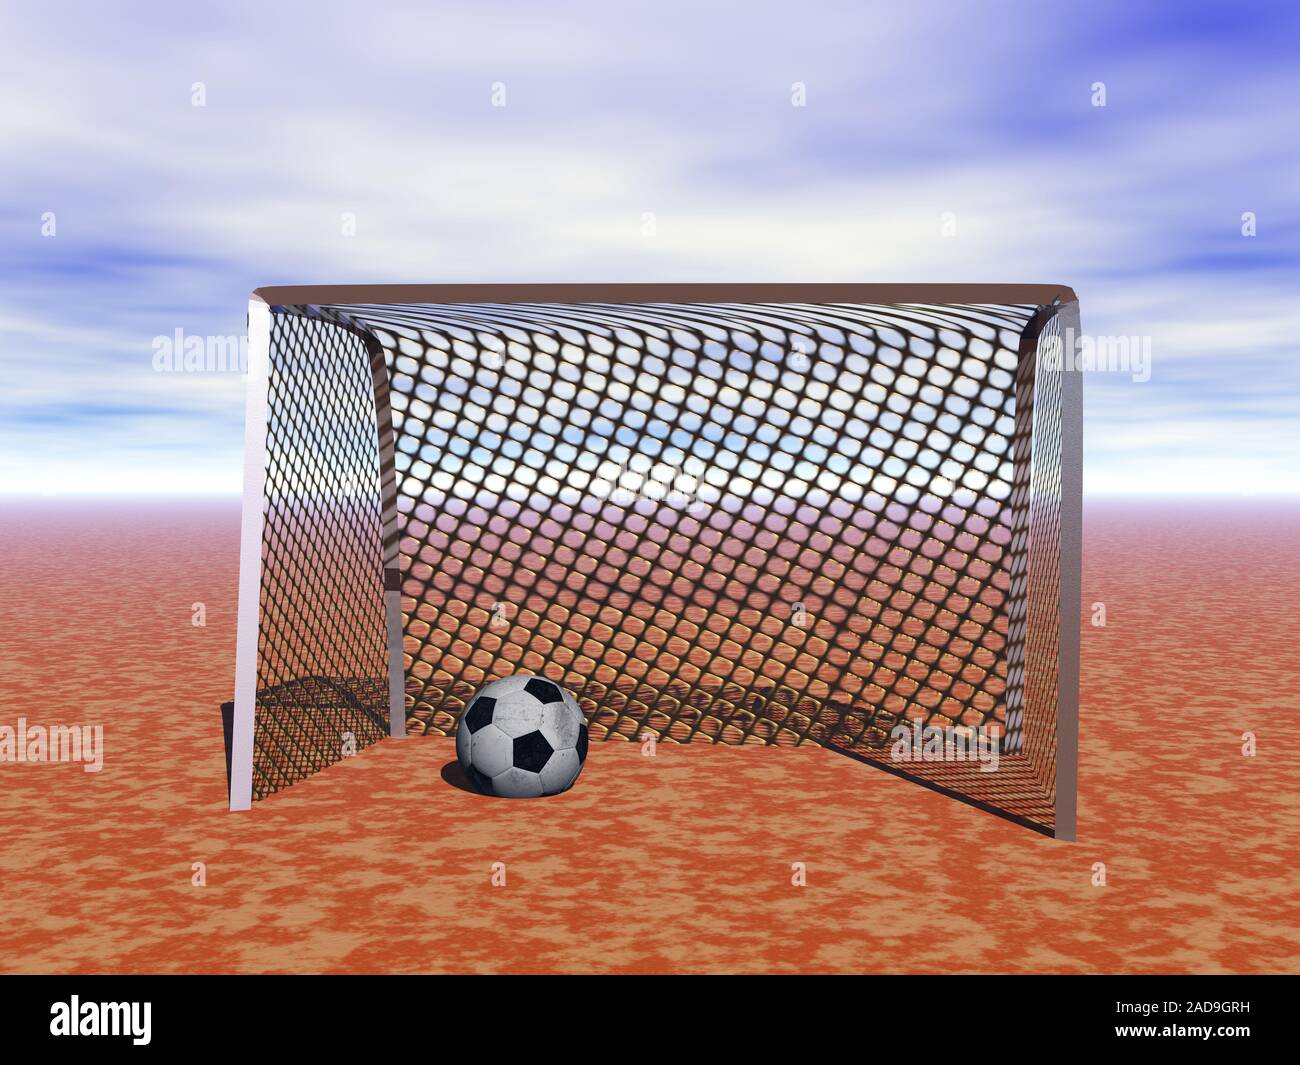 Soccer goal on clay court with ball Stock Photo